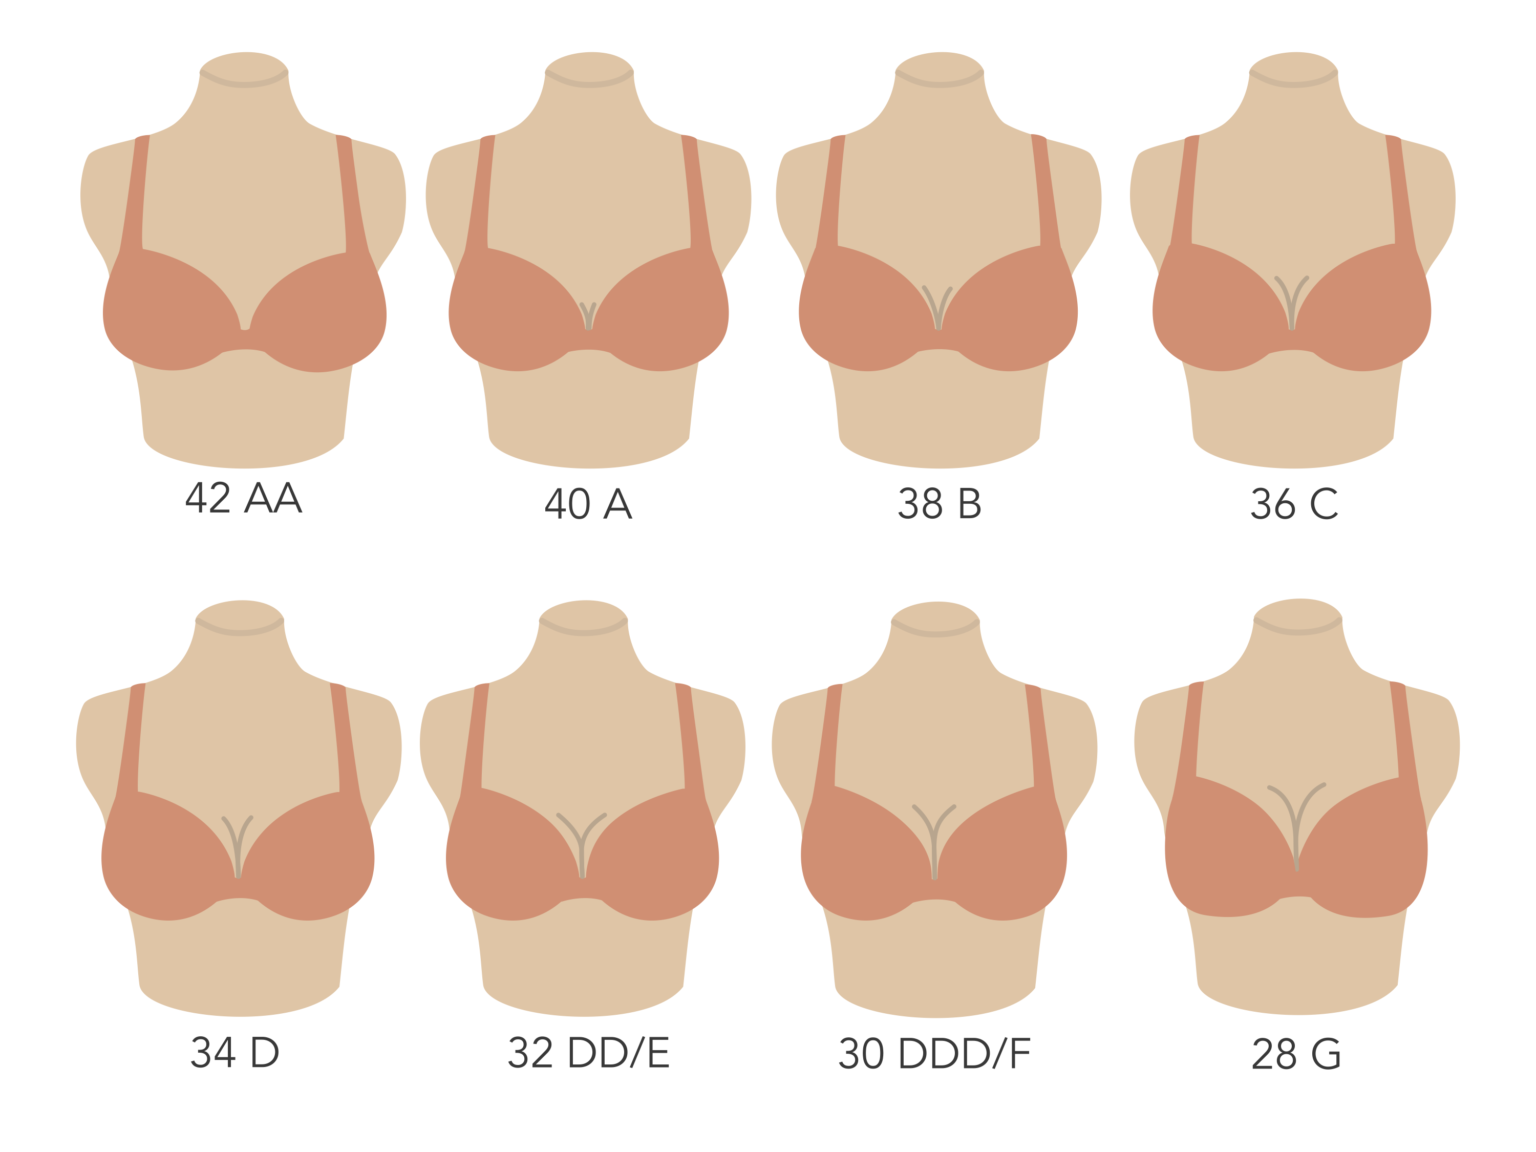 dalia stevens recommends bra size chart with real pictures pic